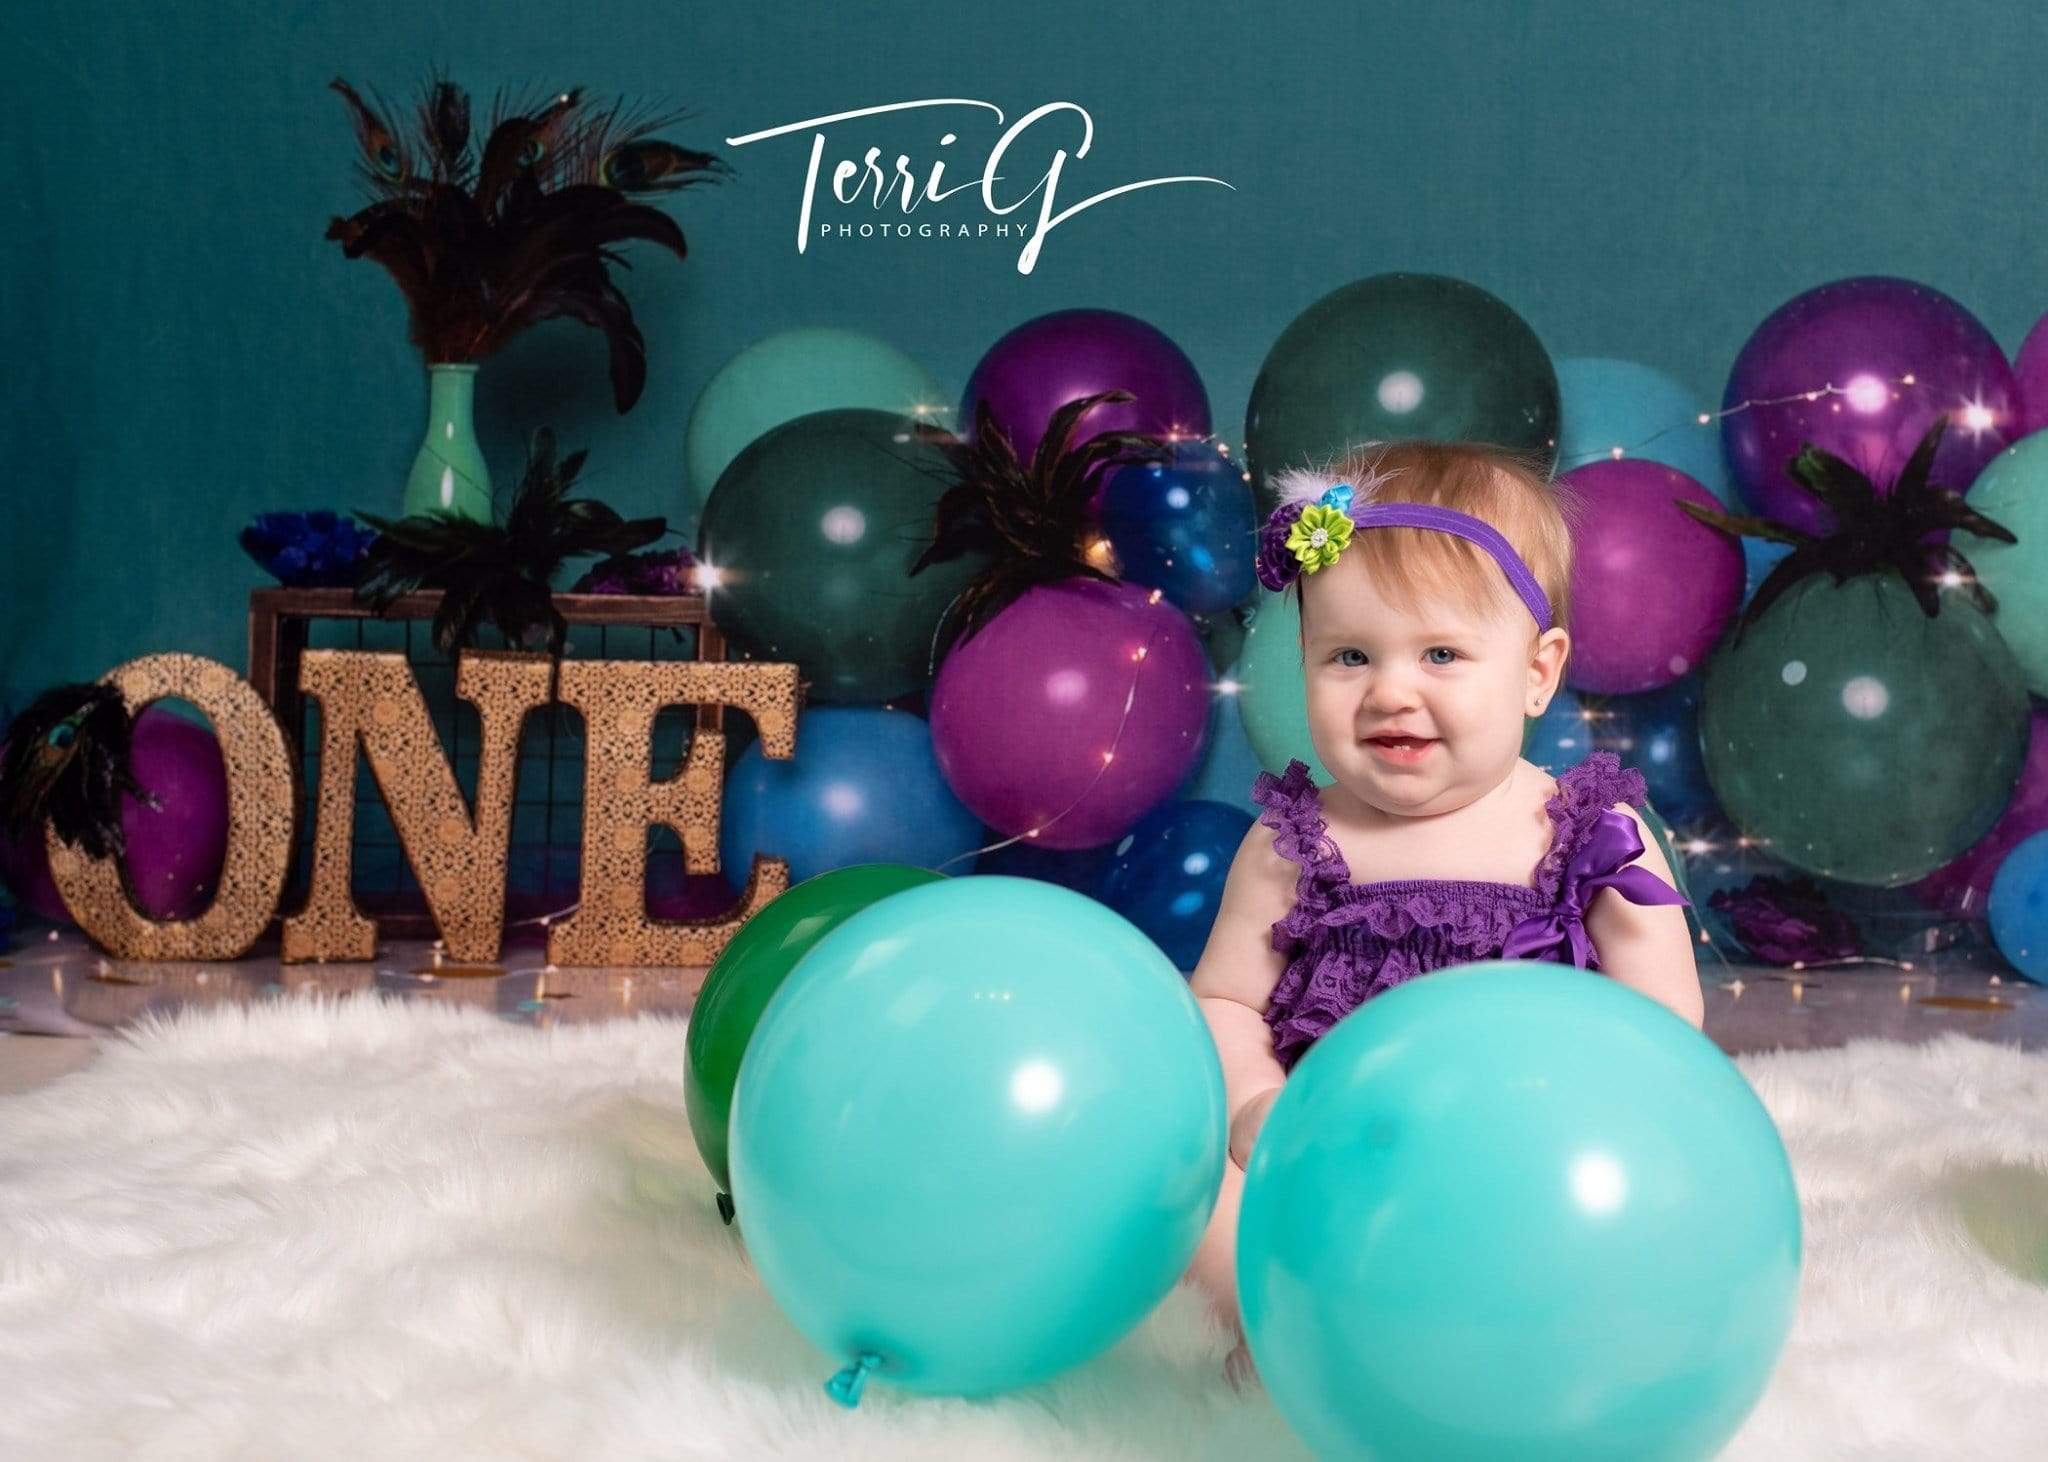 Katebackdrop鎷㈡綖Kate 1st Birthday with Balloons Backdrop for Photography Designed by Cassie Christiansen Photography